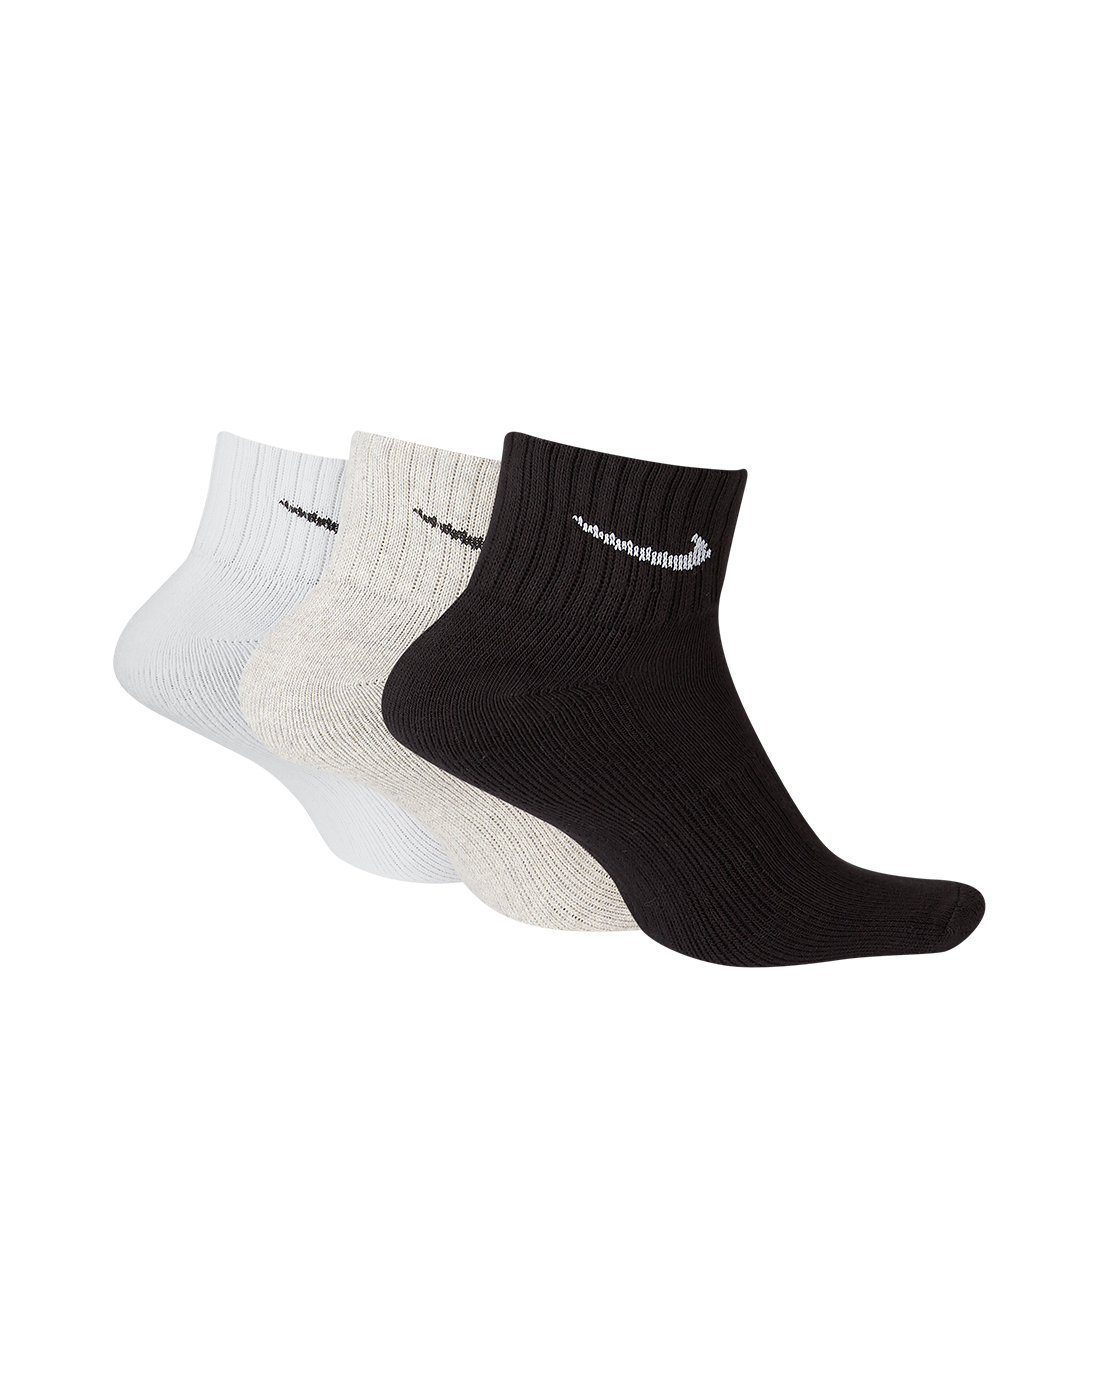 Women's Mixed Nike Ankle Socks Pack | Life Style Sports